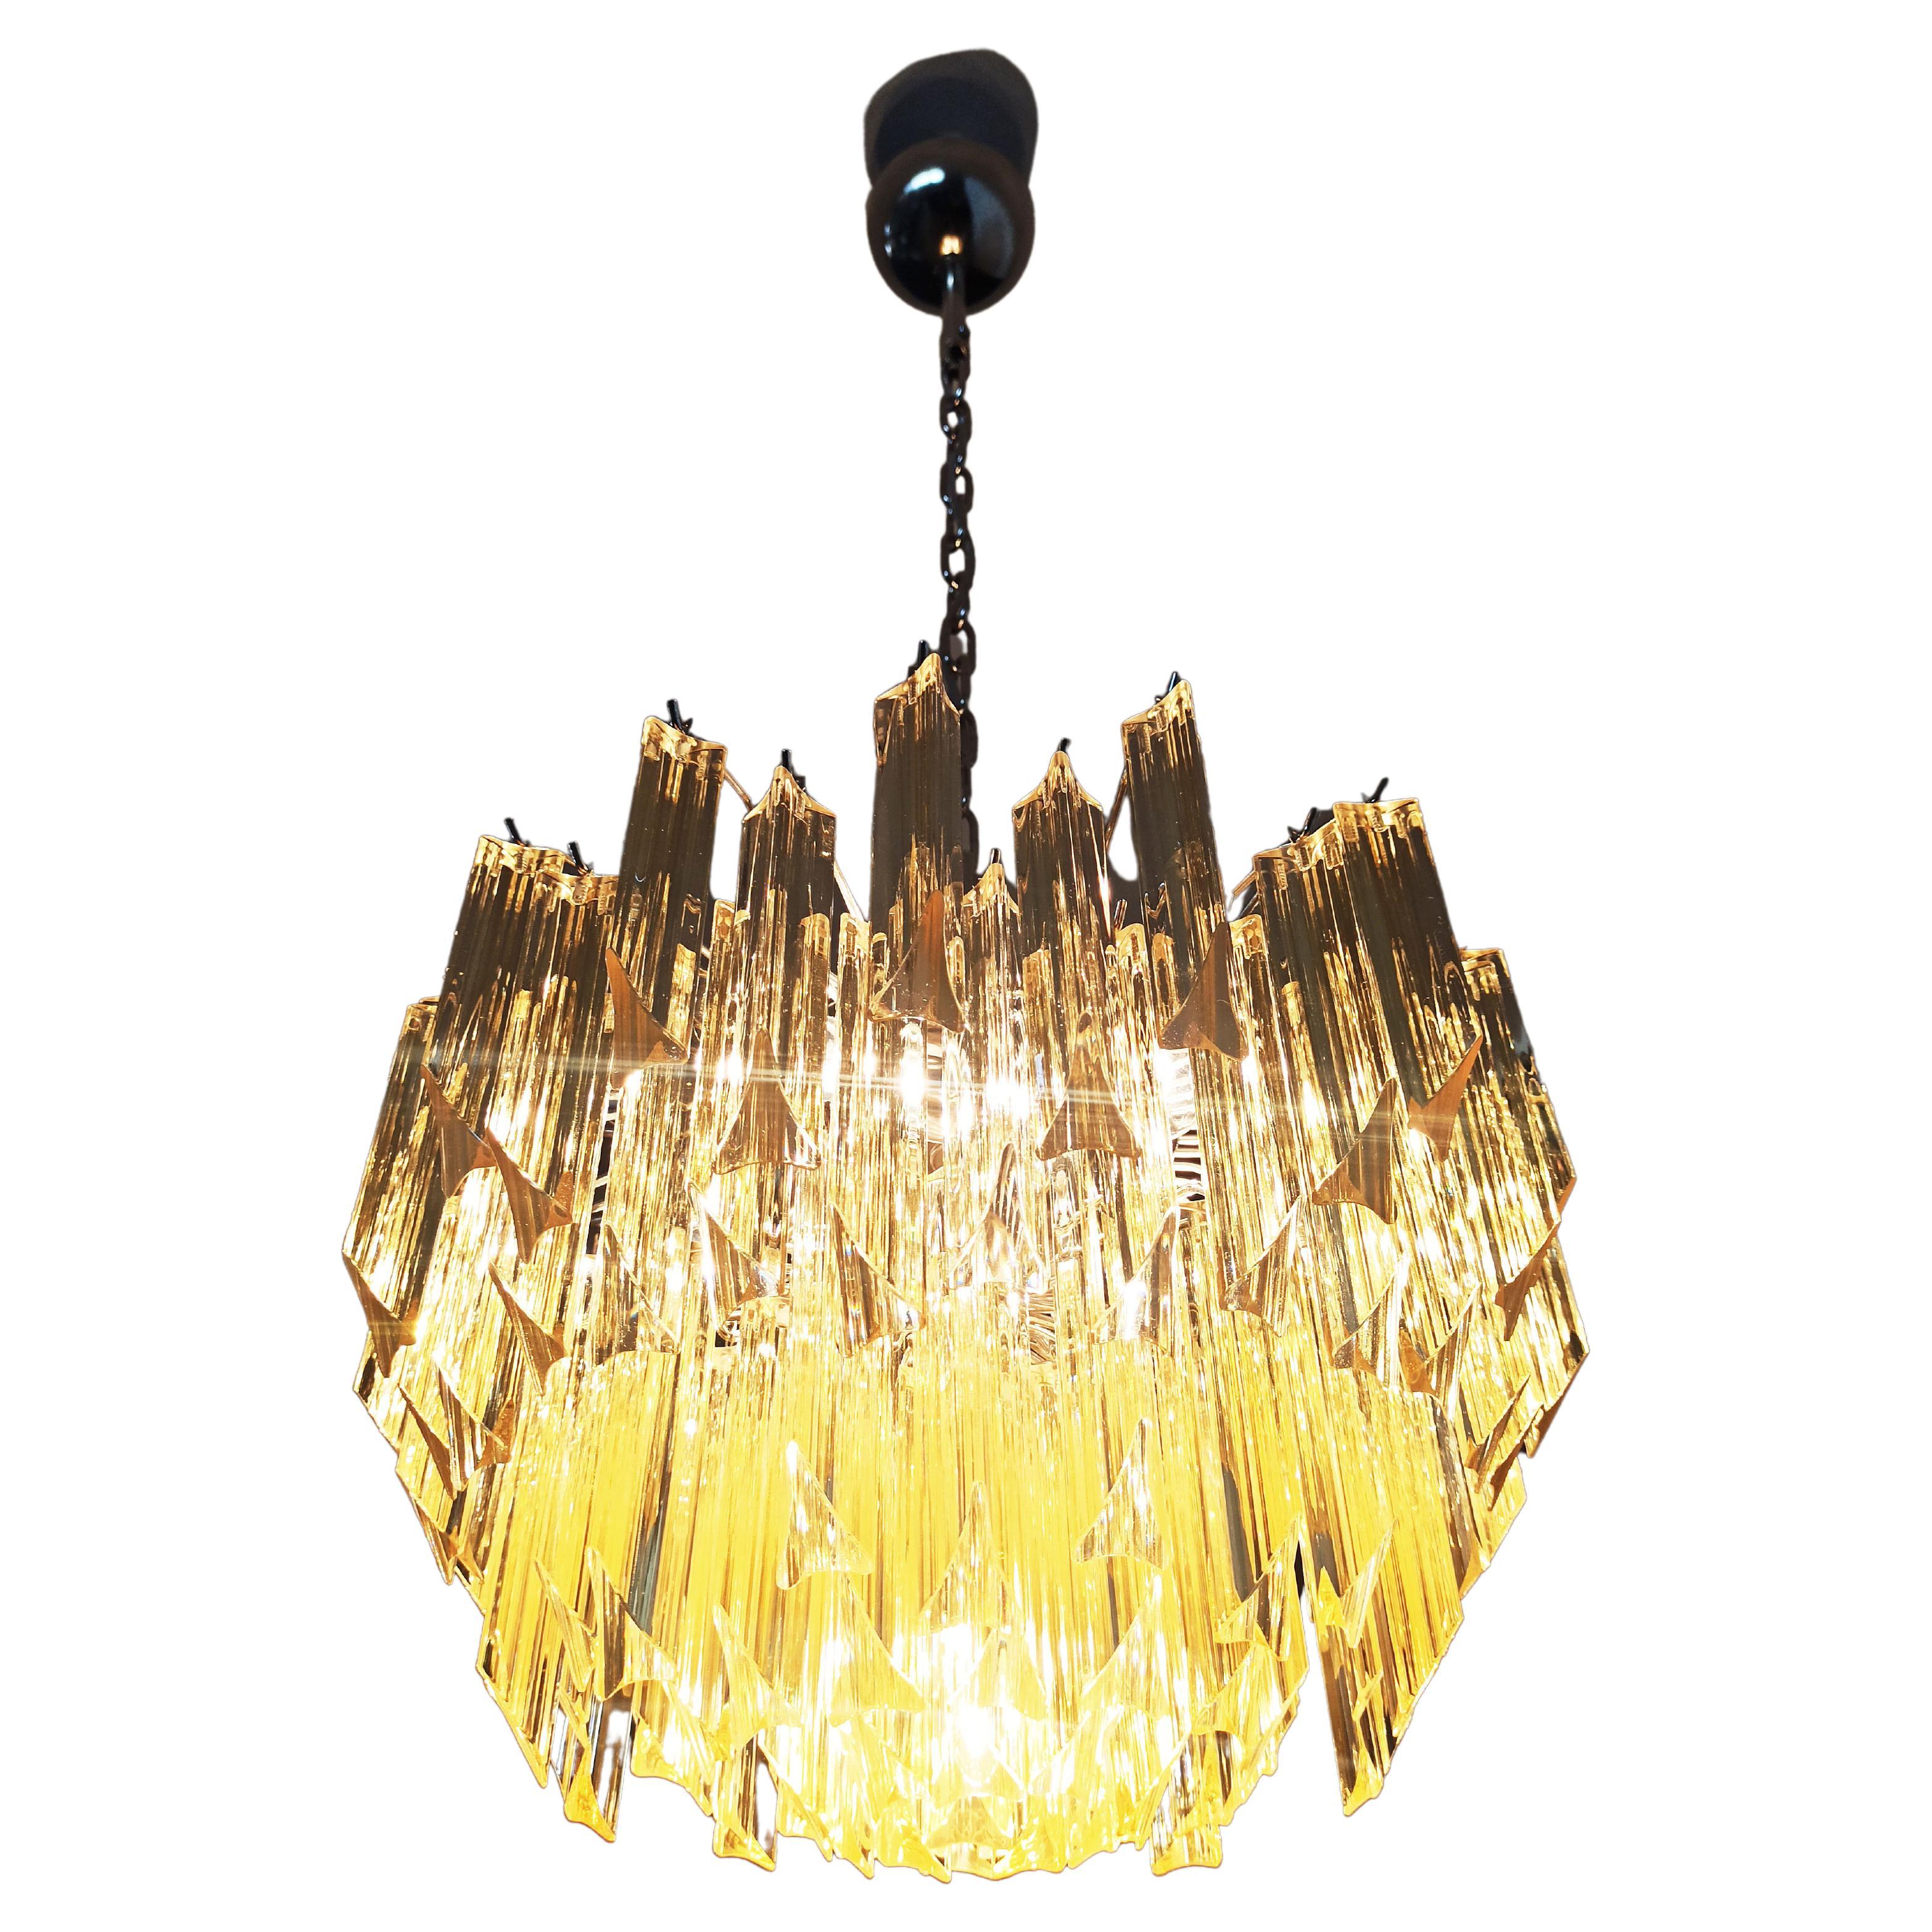 Fantastic vintage Murano chandelier made by 107 Murano crystal clear amber prism triedri in a nickel metal frame. Period: 1980'S
Dimensions: 41,90 inches height (108 cm) with chain; 17,70 inches height (45 cm) without chain; 17,70 inches diameter